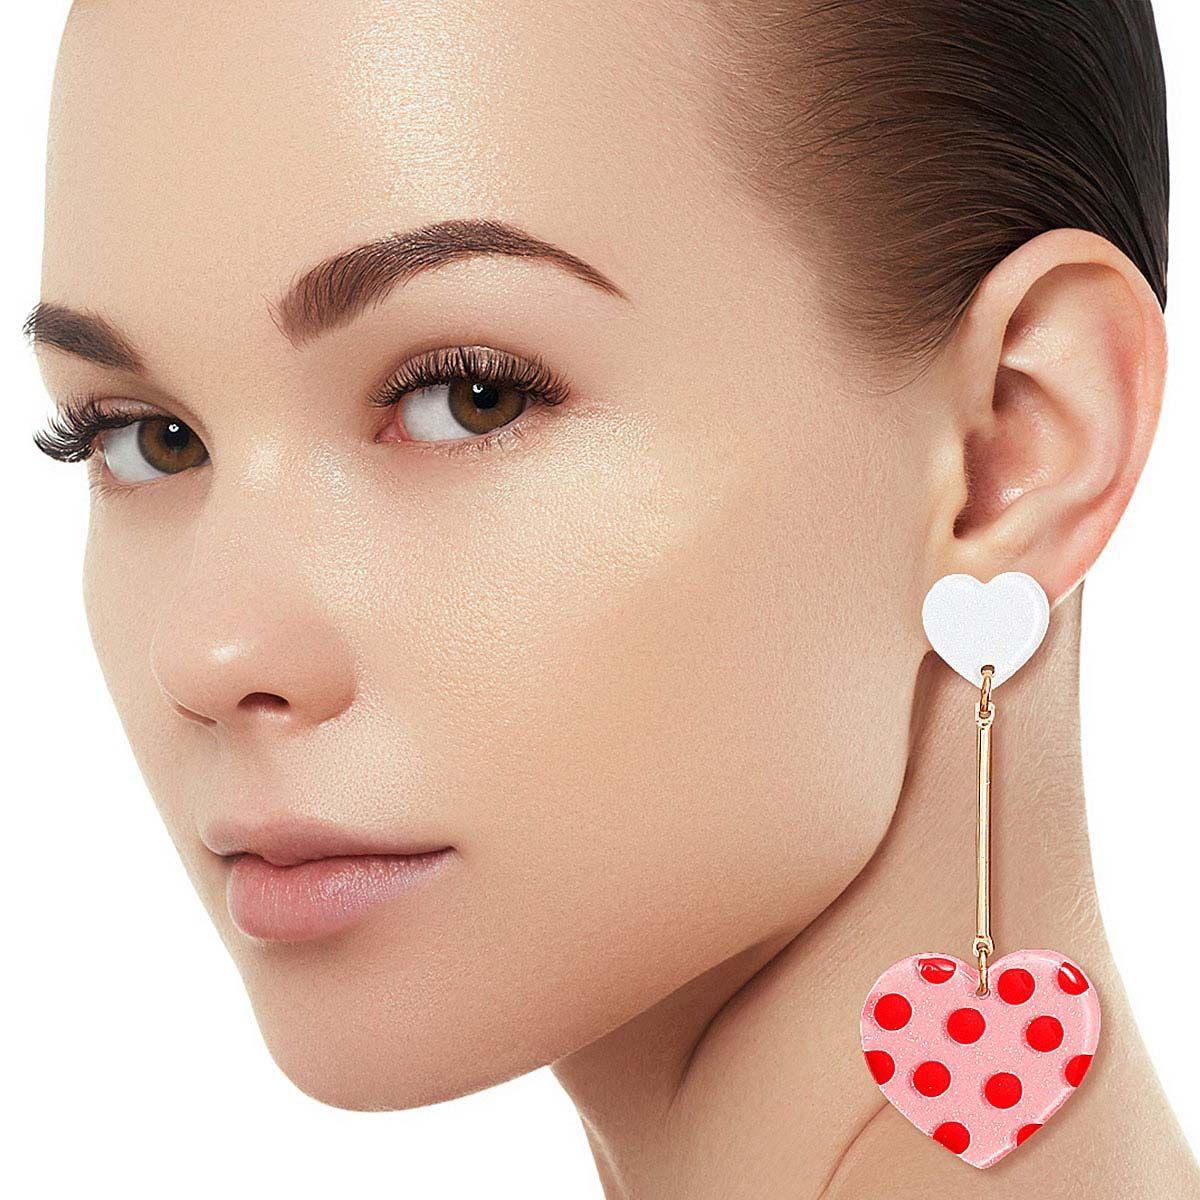 Discover 183+ big red heart earrings